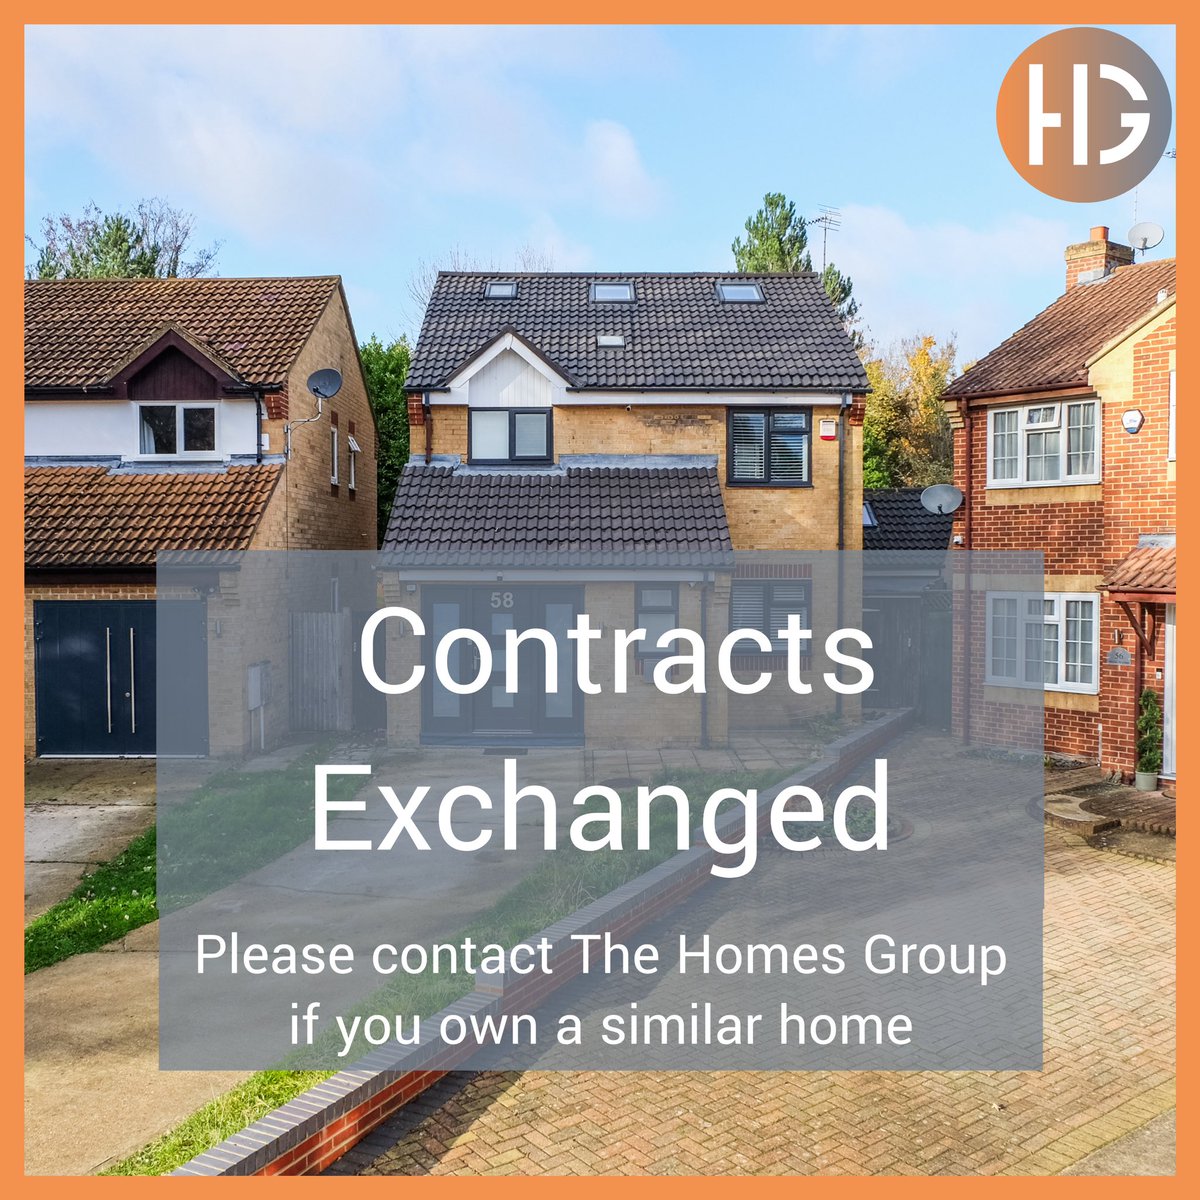 Moving people in Greenhithe 
Contracts exchanged on our five bedroom detached house. 
Thinking of moving? 
Contact The Homes Group for your valuation & home move consultation. 
#property #houseprices #moving